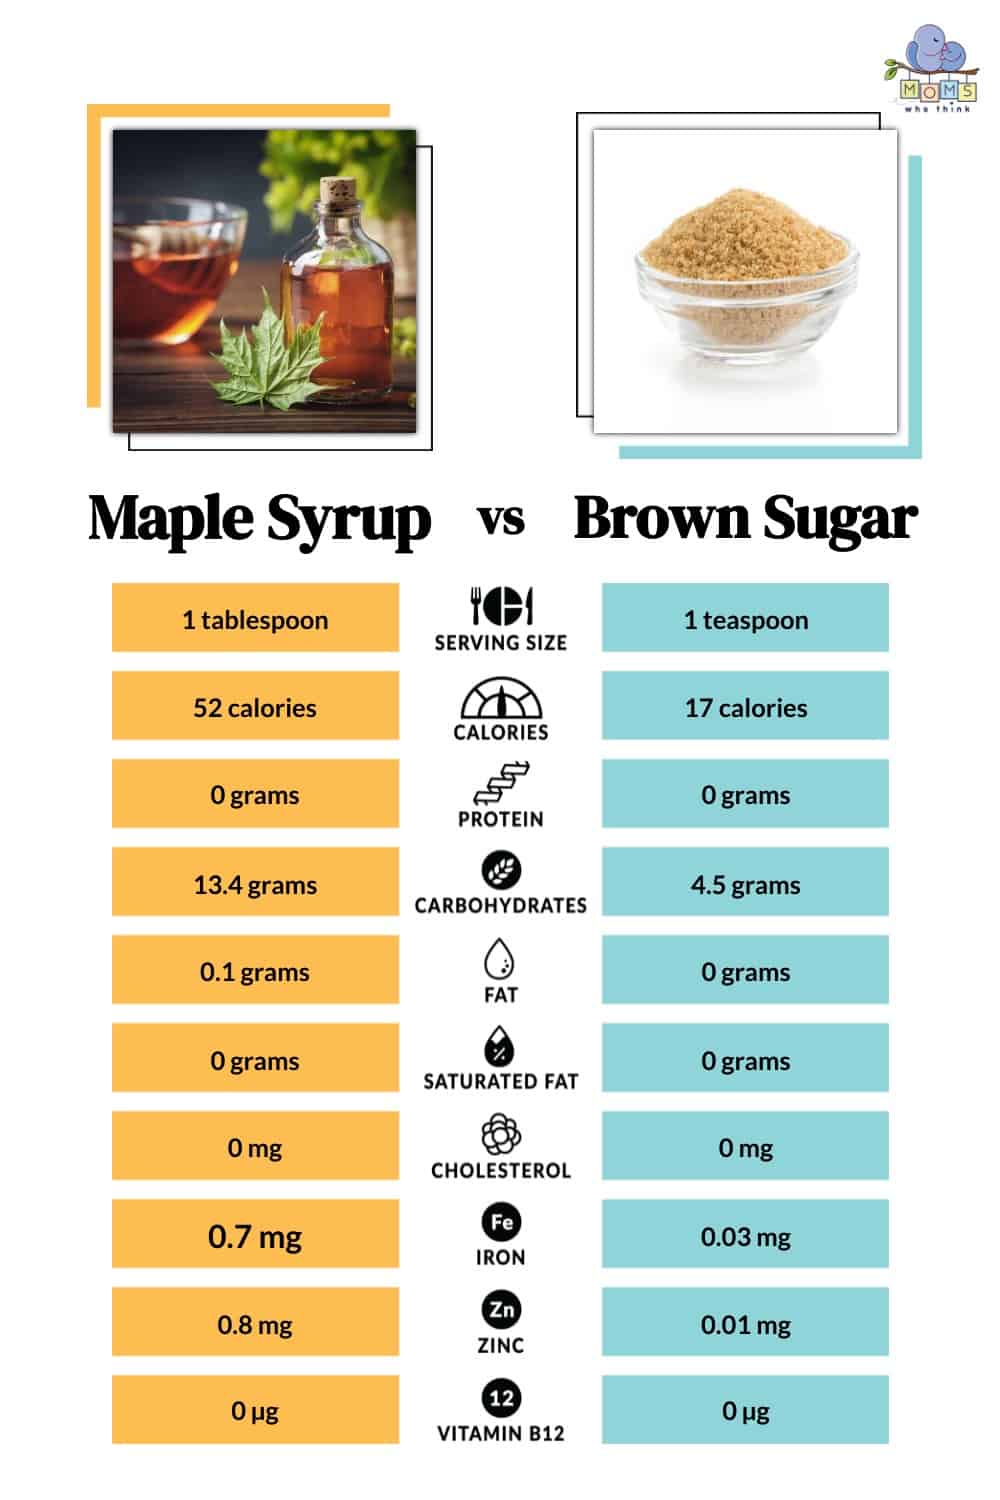 Maple Syrup vs Brown Sugar Nutritional Facts